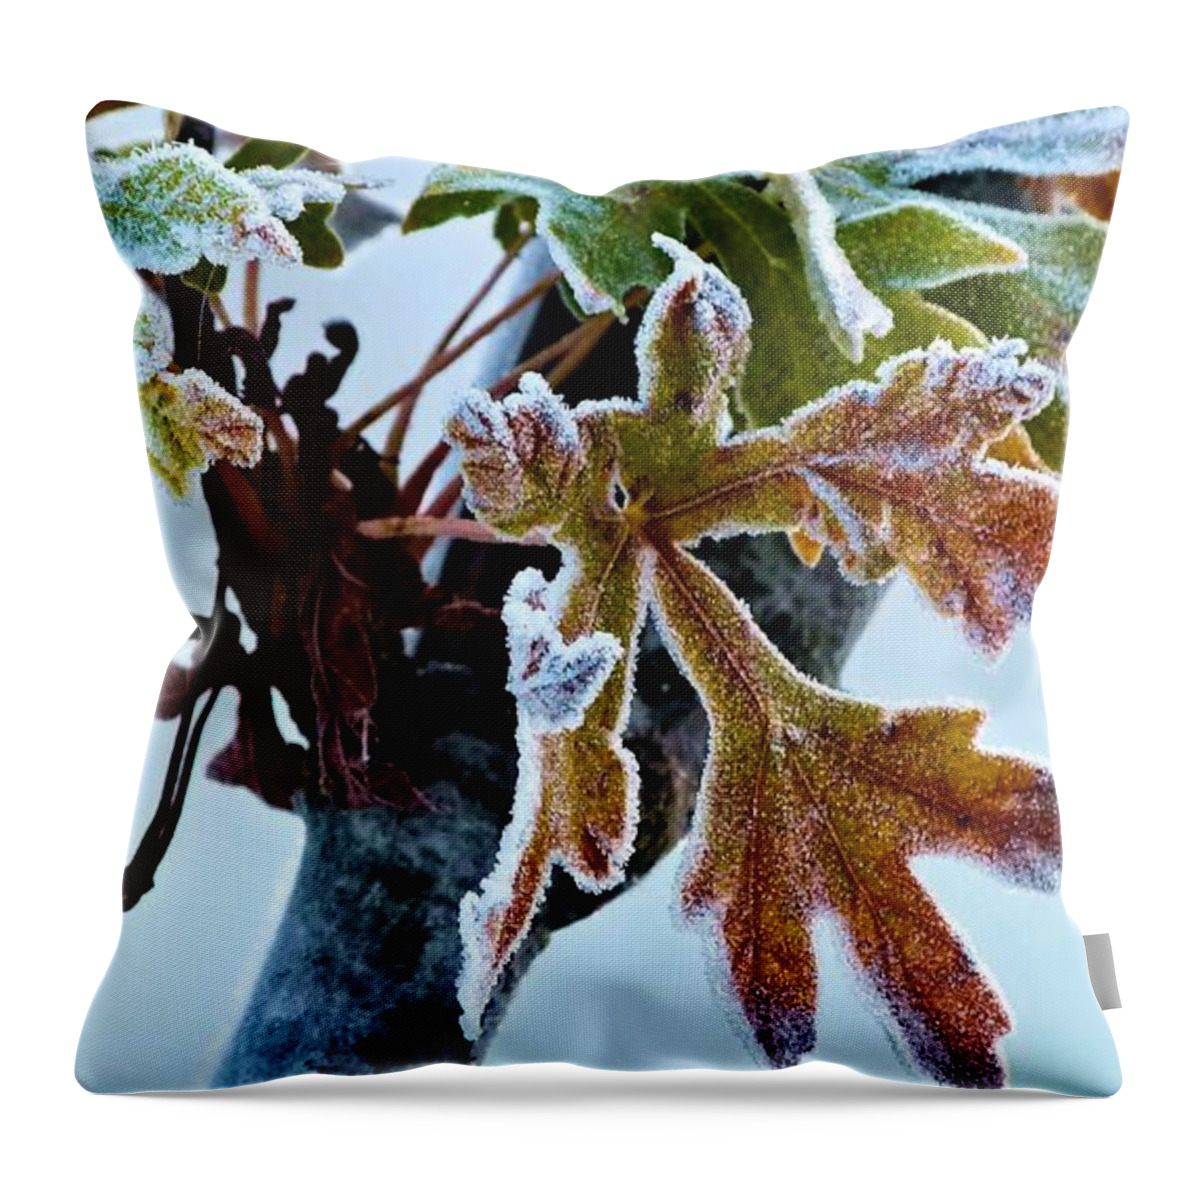 Weather Throw Pillow featuring the photograph Packetful Of Rime by Julia Hassett